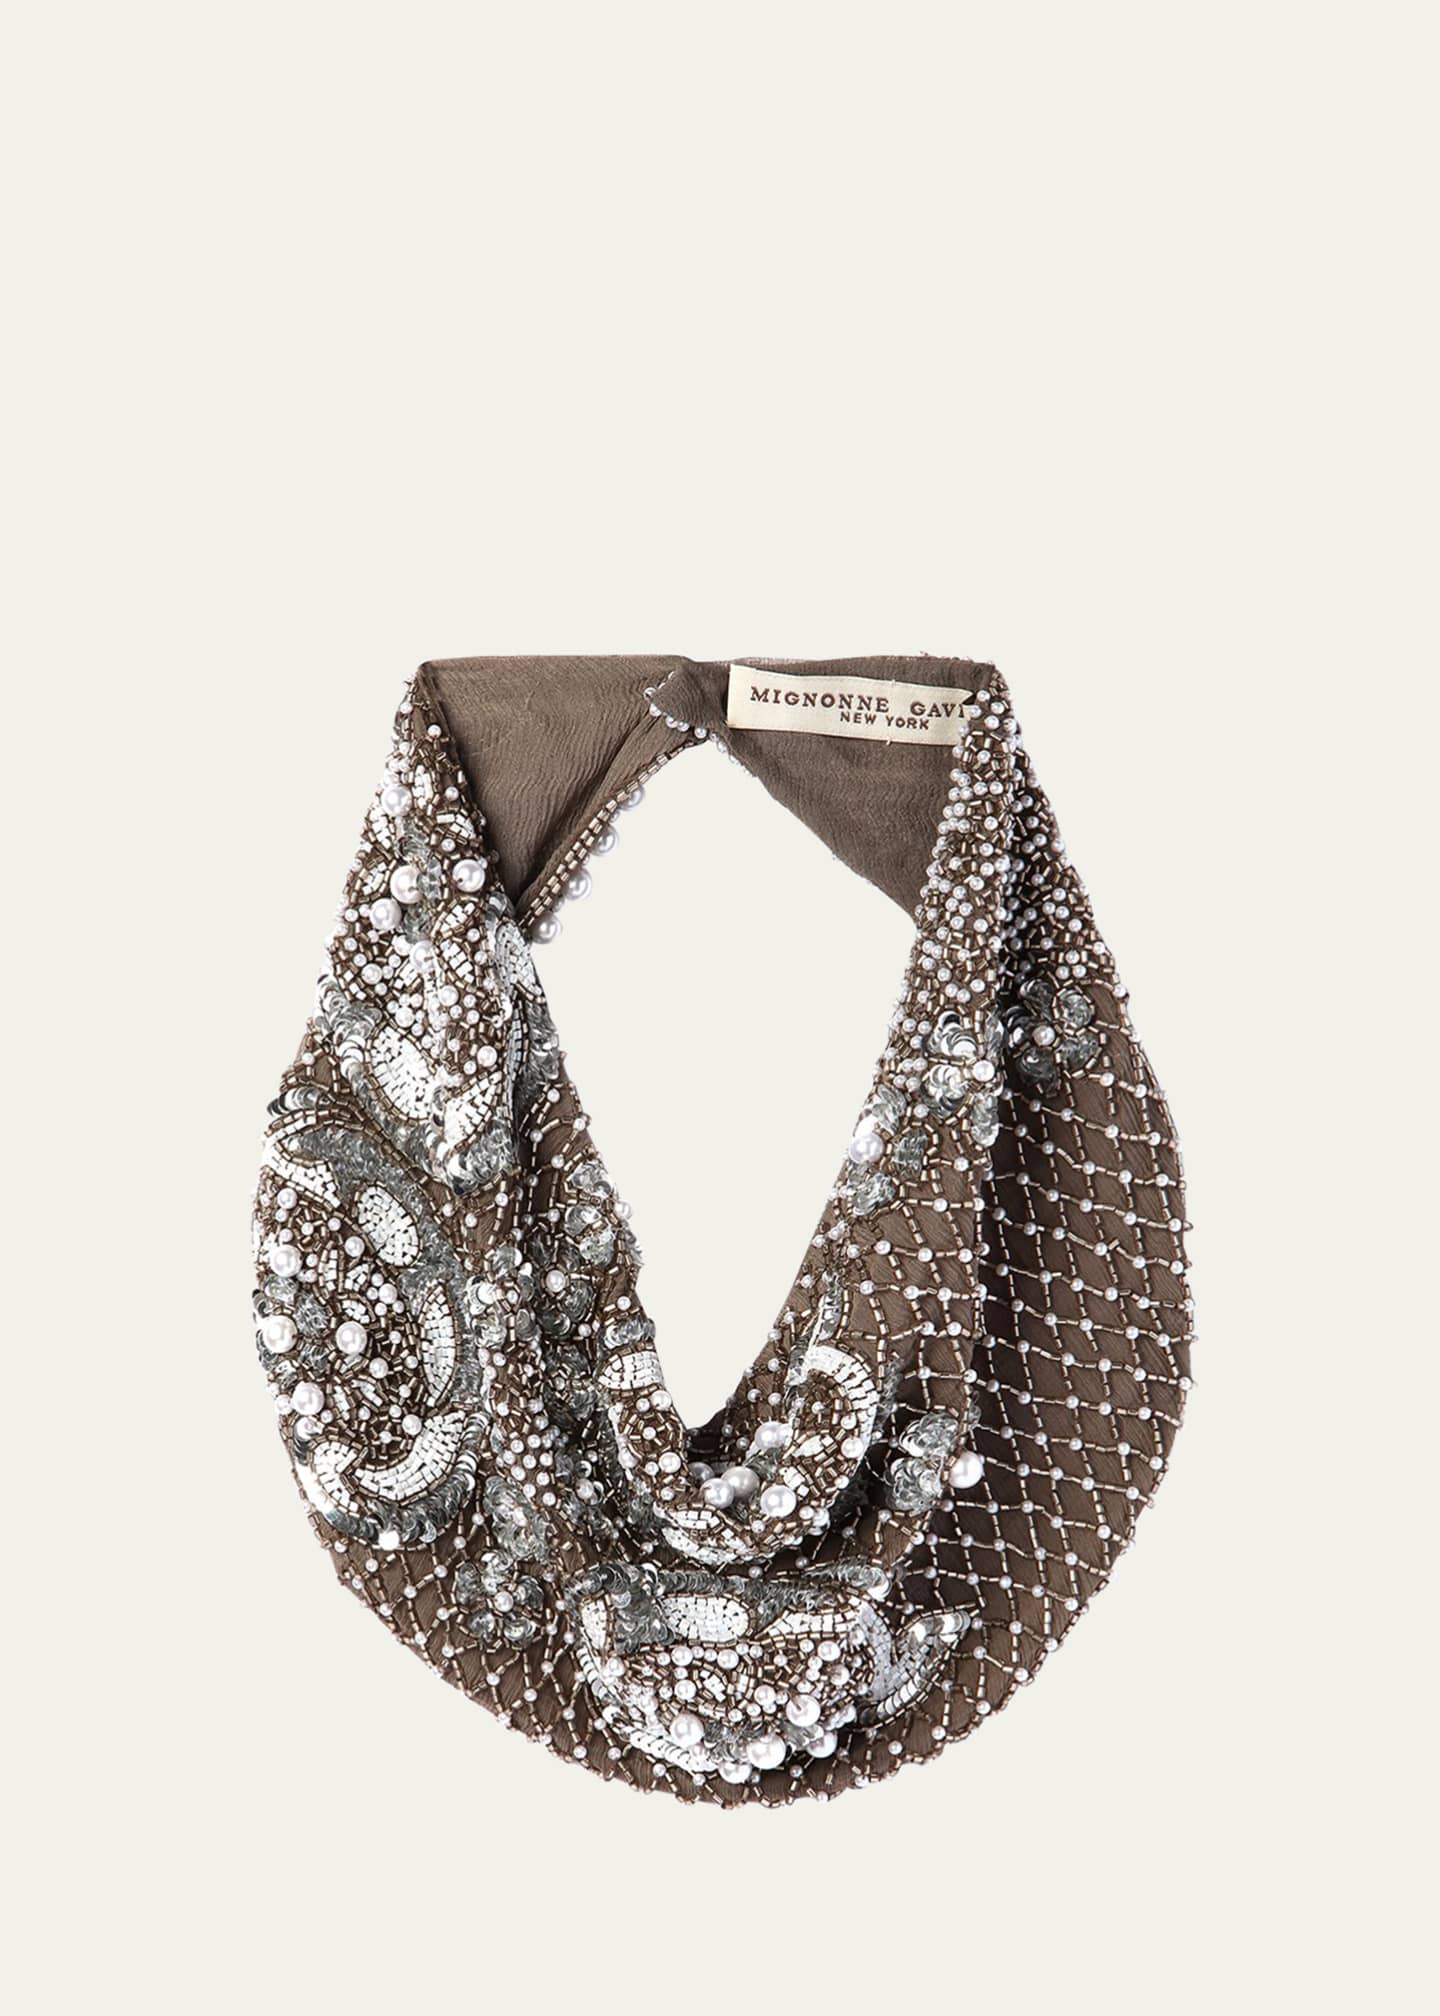 Mignonne Gavigan Le Charlot Beaded Scarf Necklace, Gray Image 1 of 2